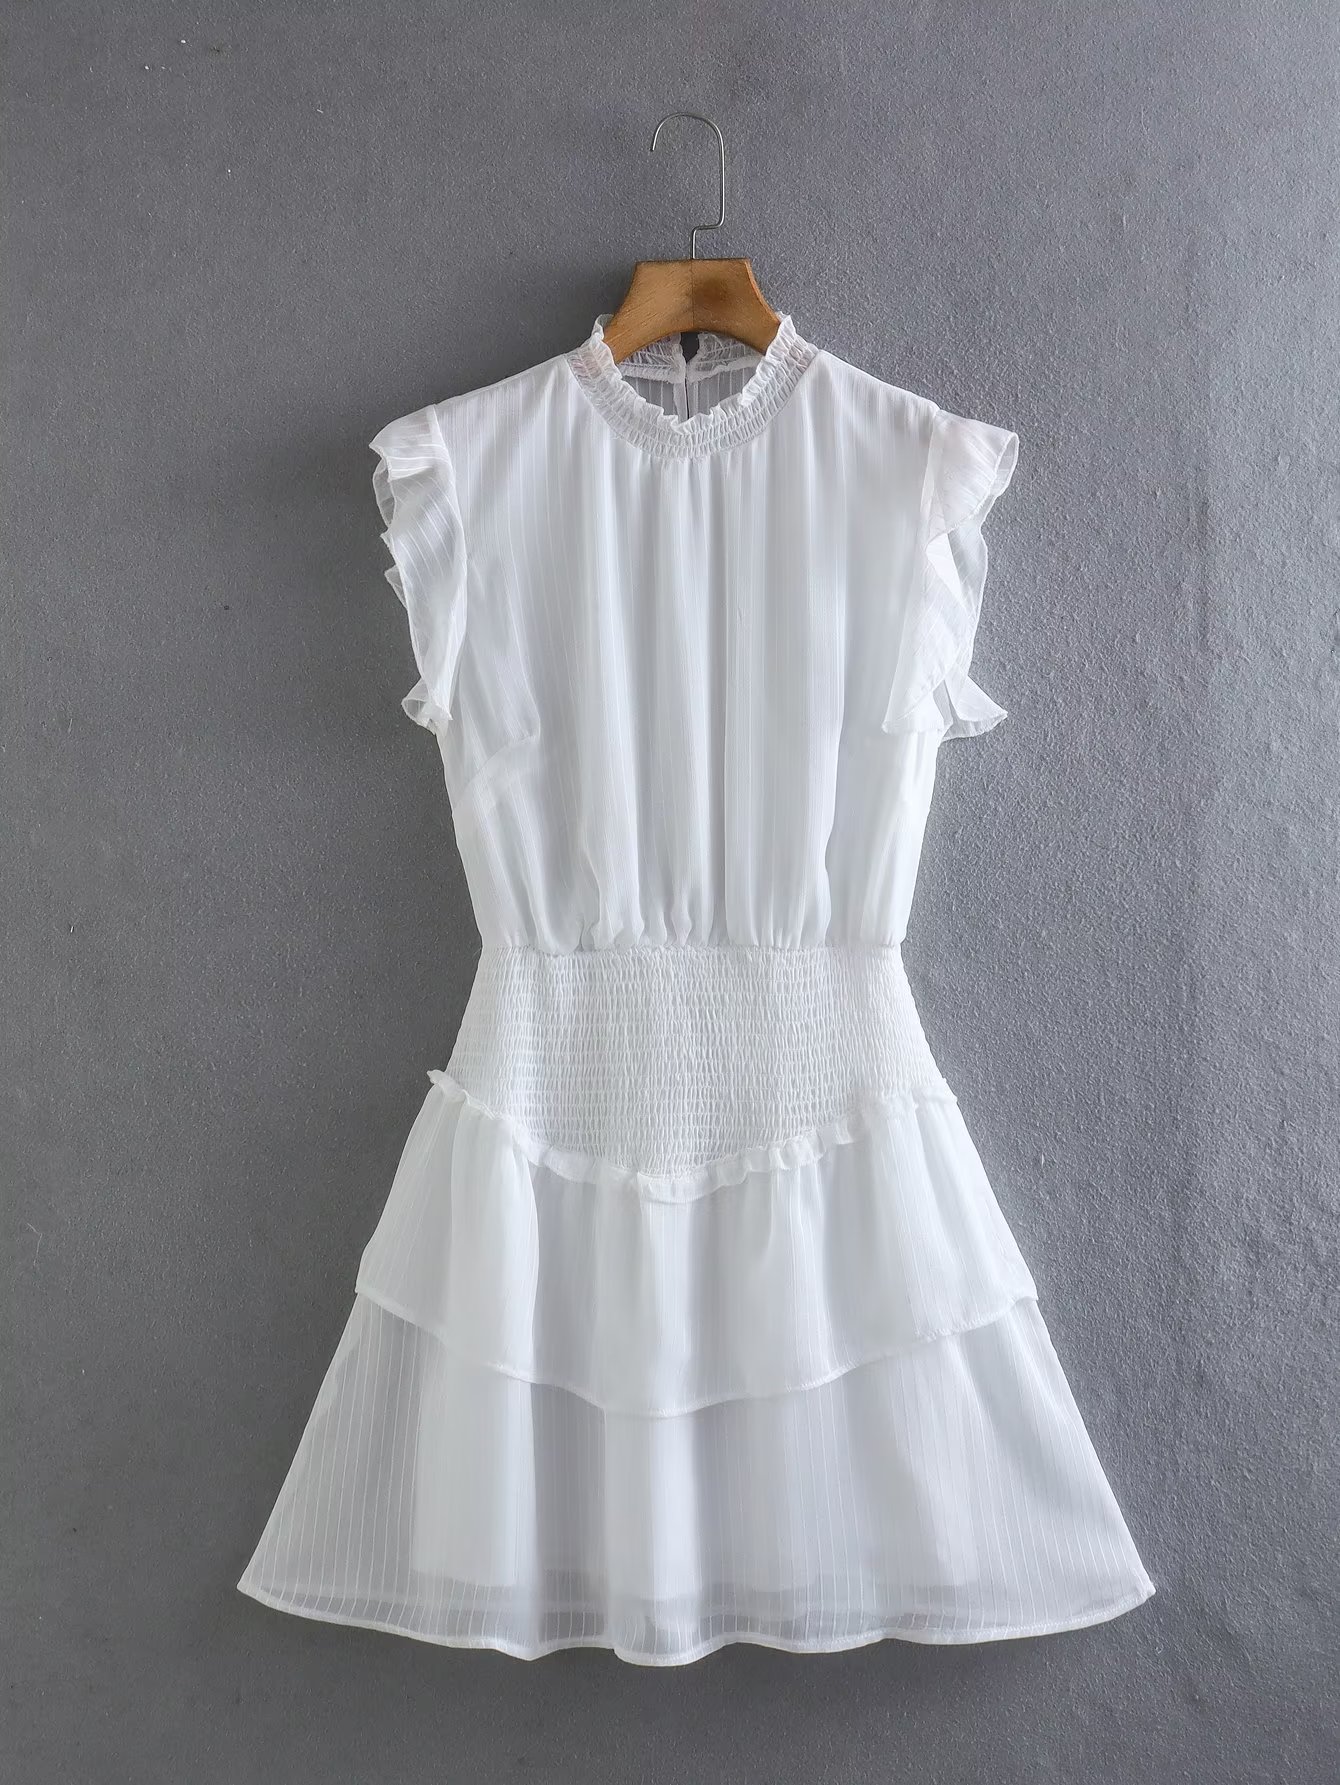 French White Refined Handmade Lace Stitching Multi Layer Tiered Dress - Dresses - Uniqistic.com